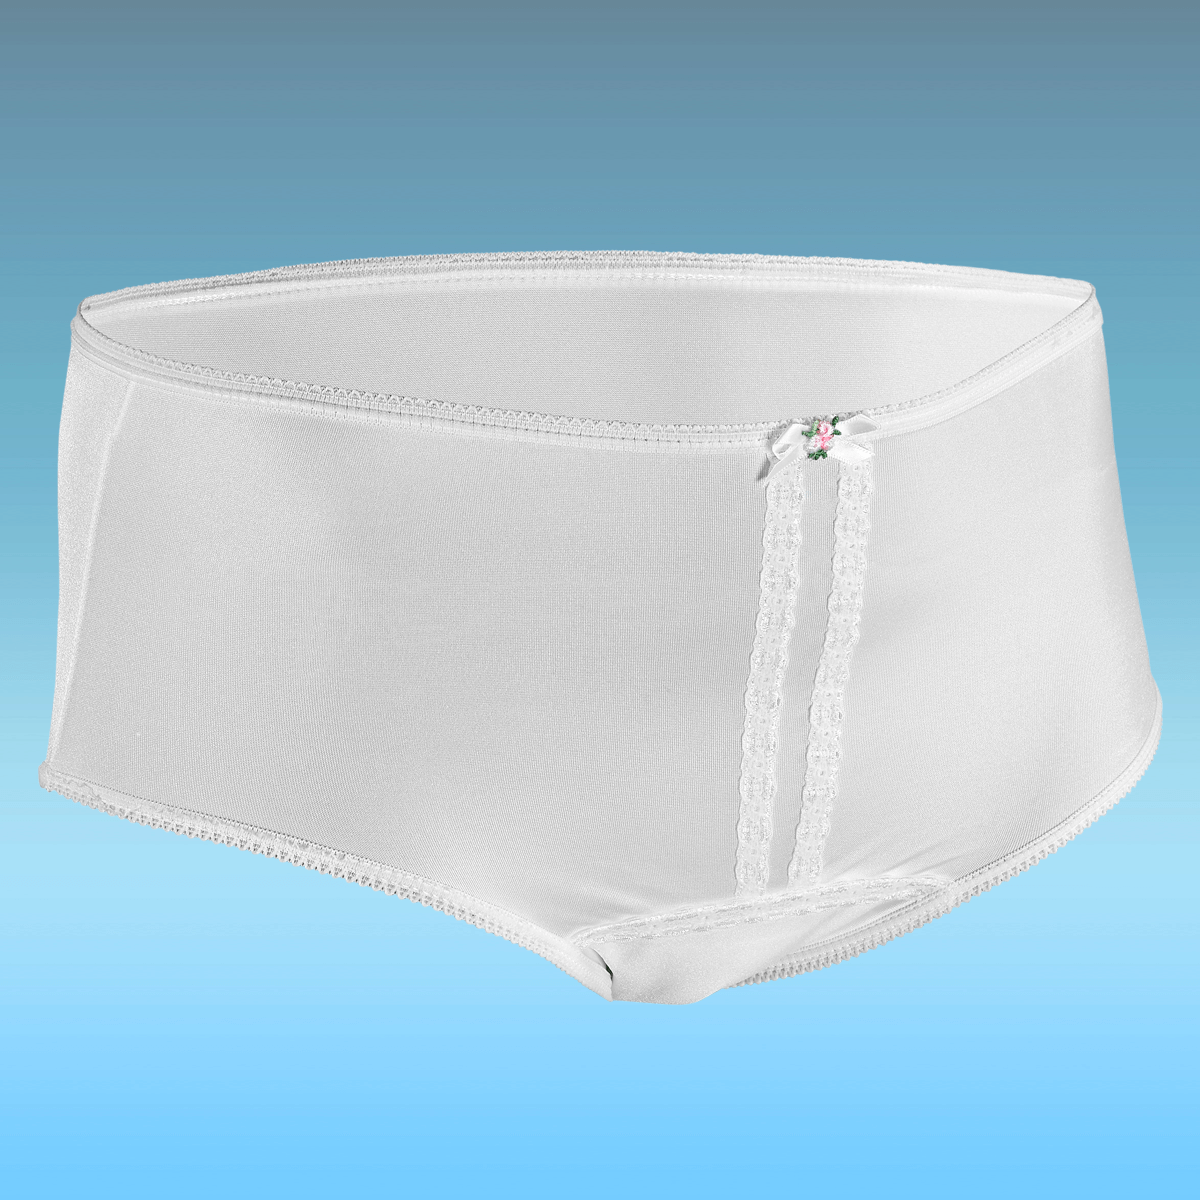 Women's Washable Incontinence Panties